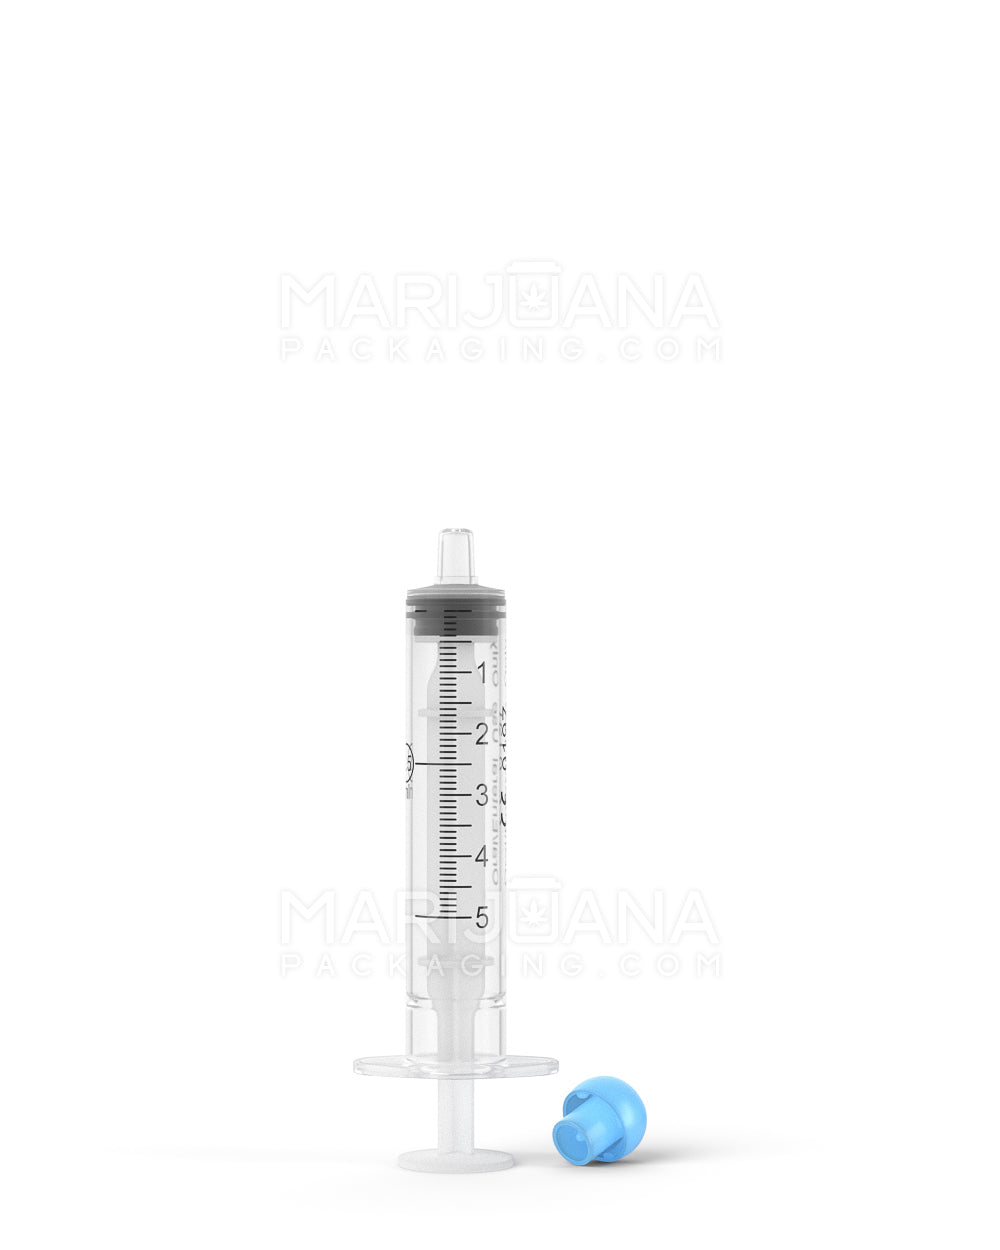 Plastic Oral Concentrate Syringes | 5mL - 1mL Increments - 100 Count - 9